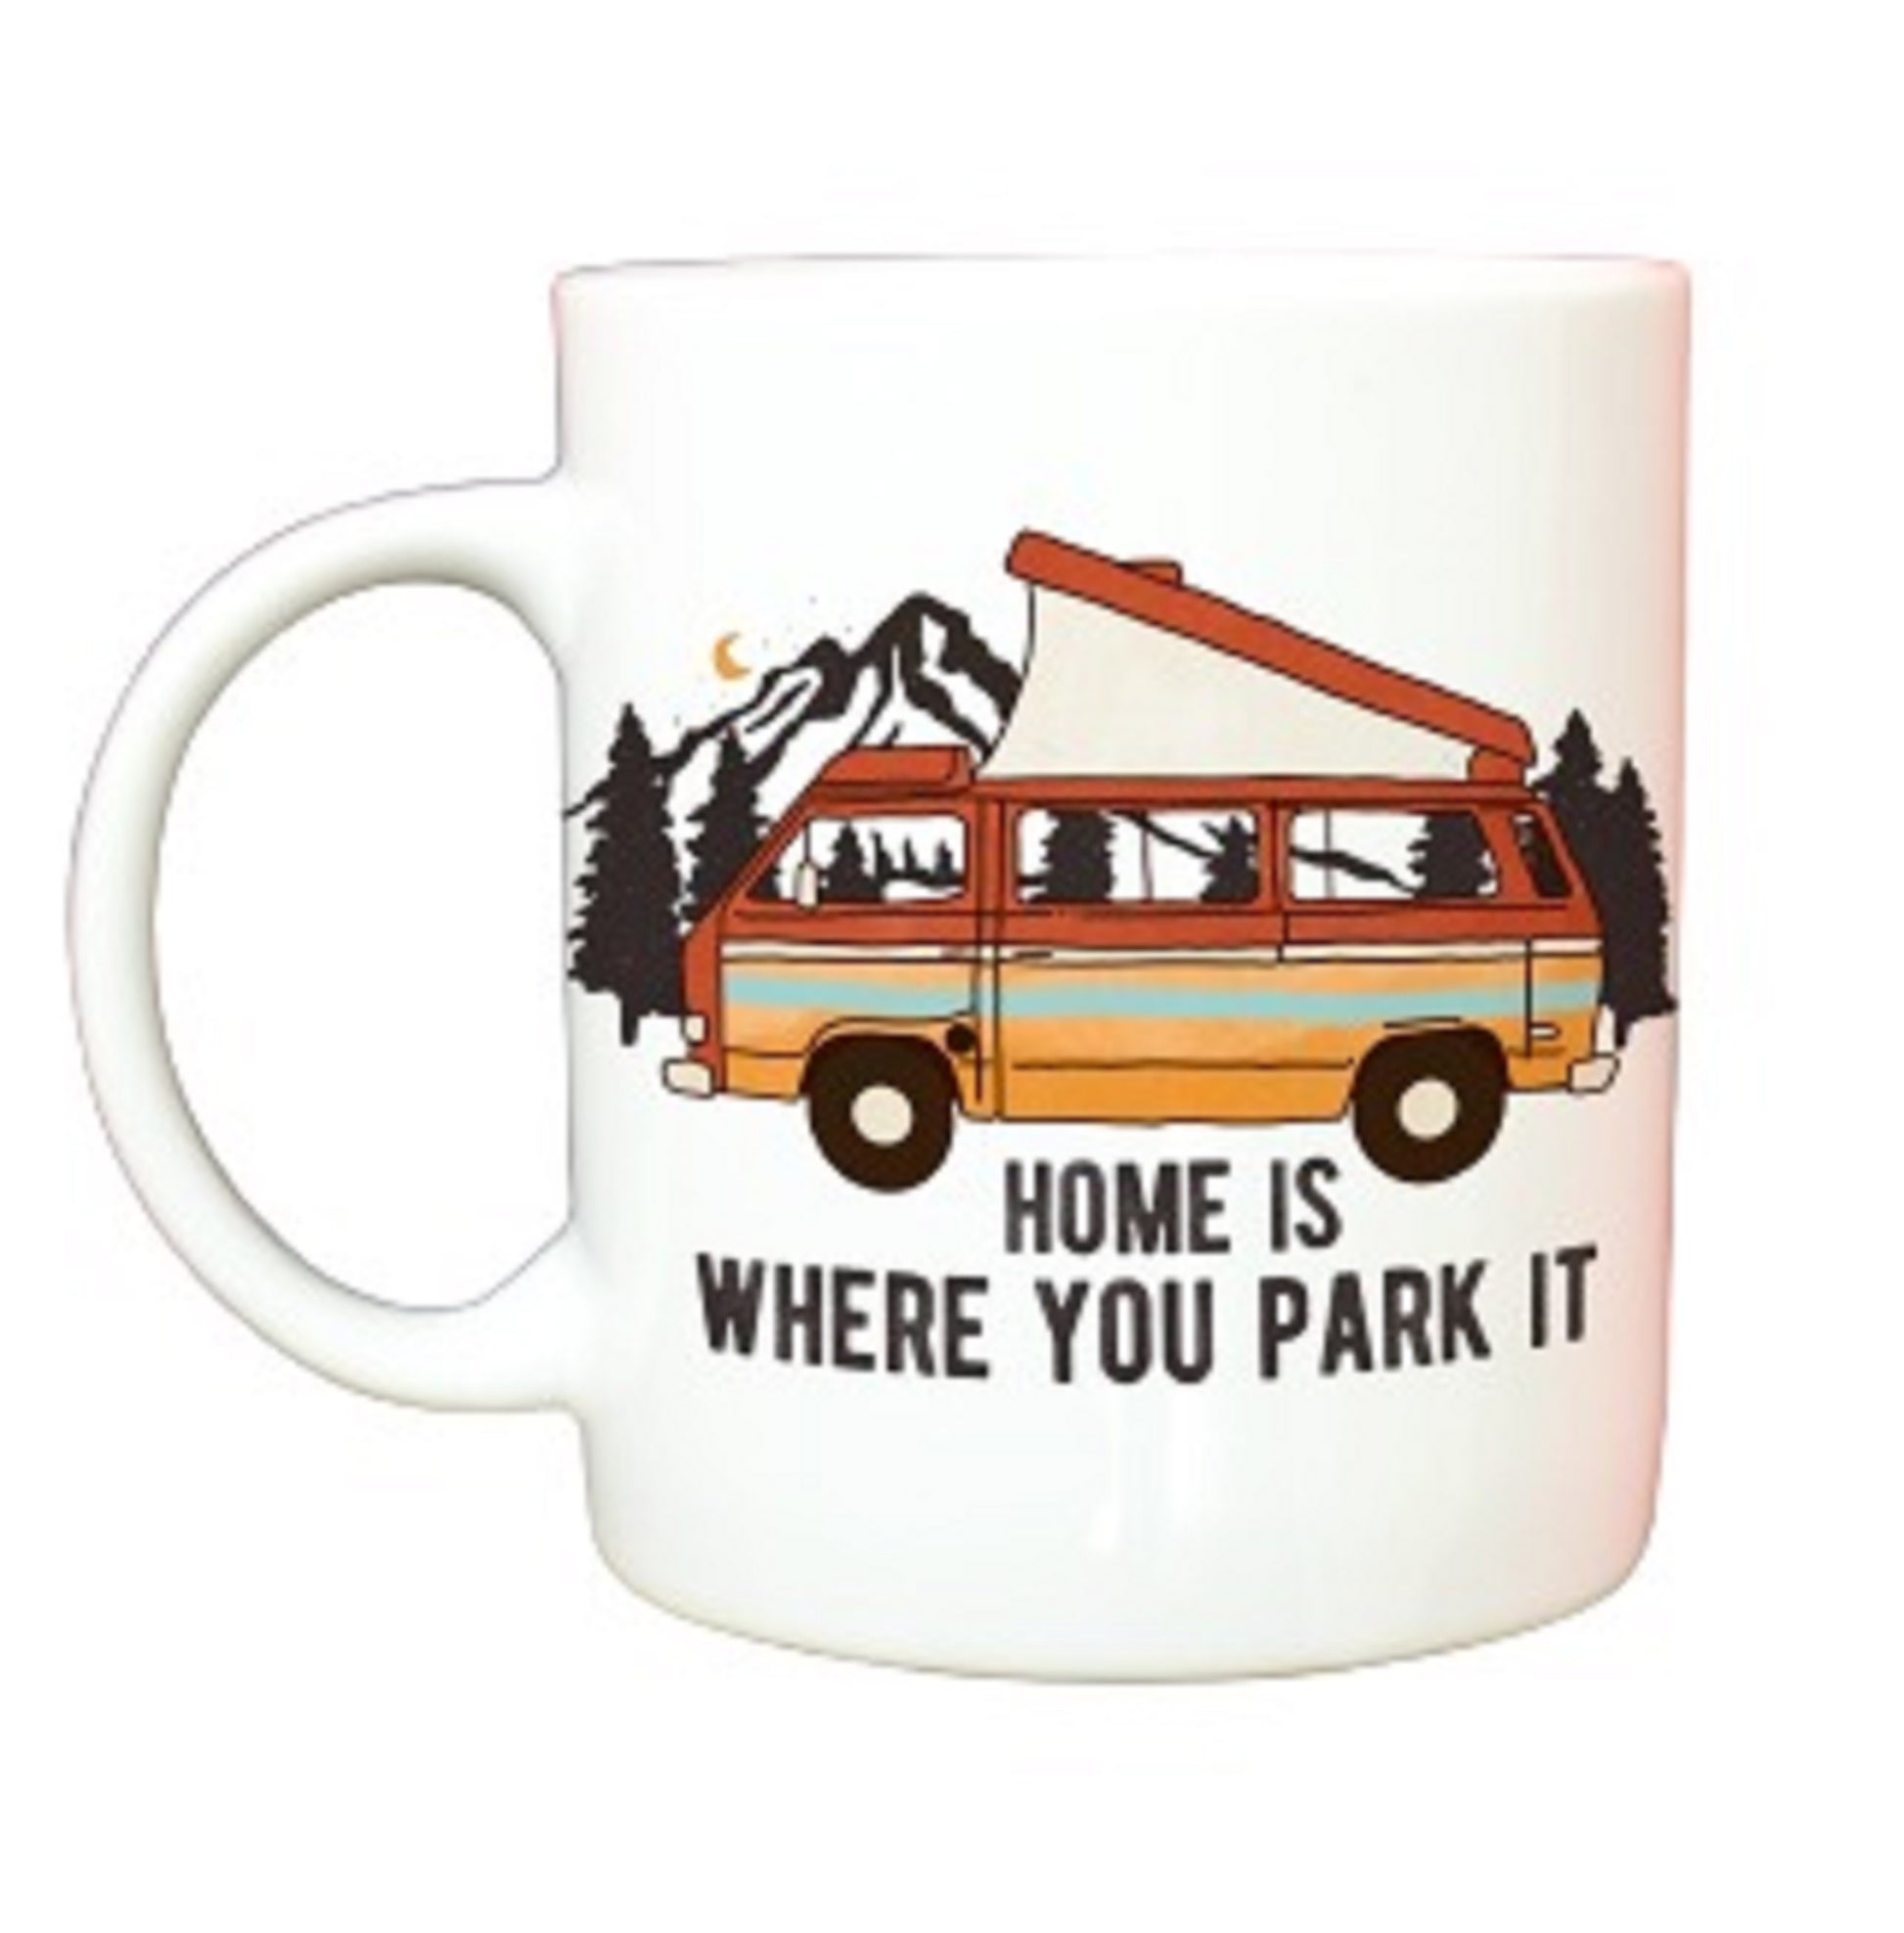  T25 Camper Home is Where You Park It Mug by Free Spirit Accessories sold by Free Spirit Accessories